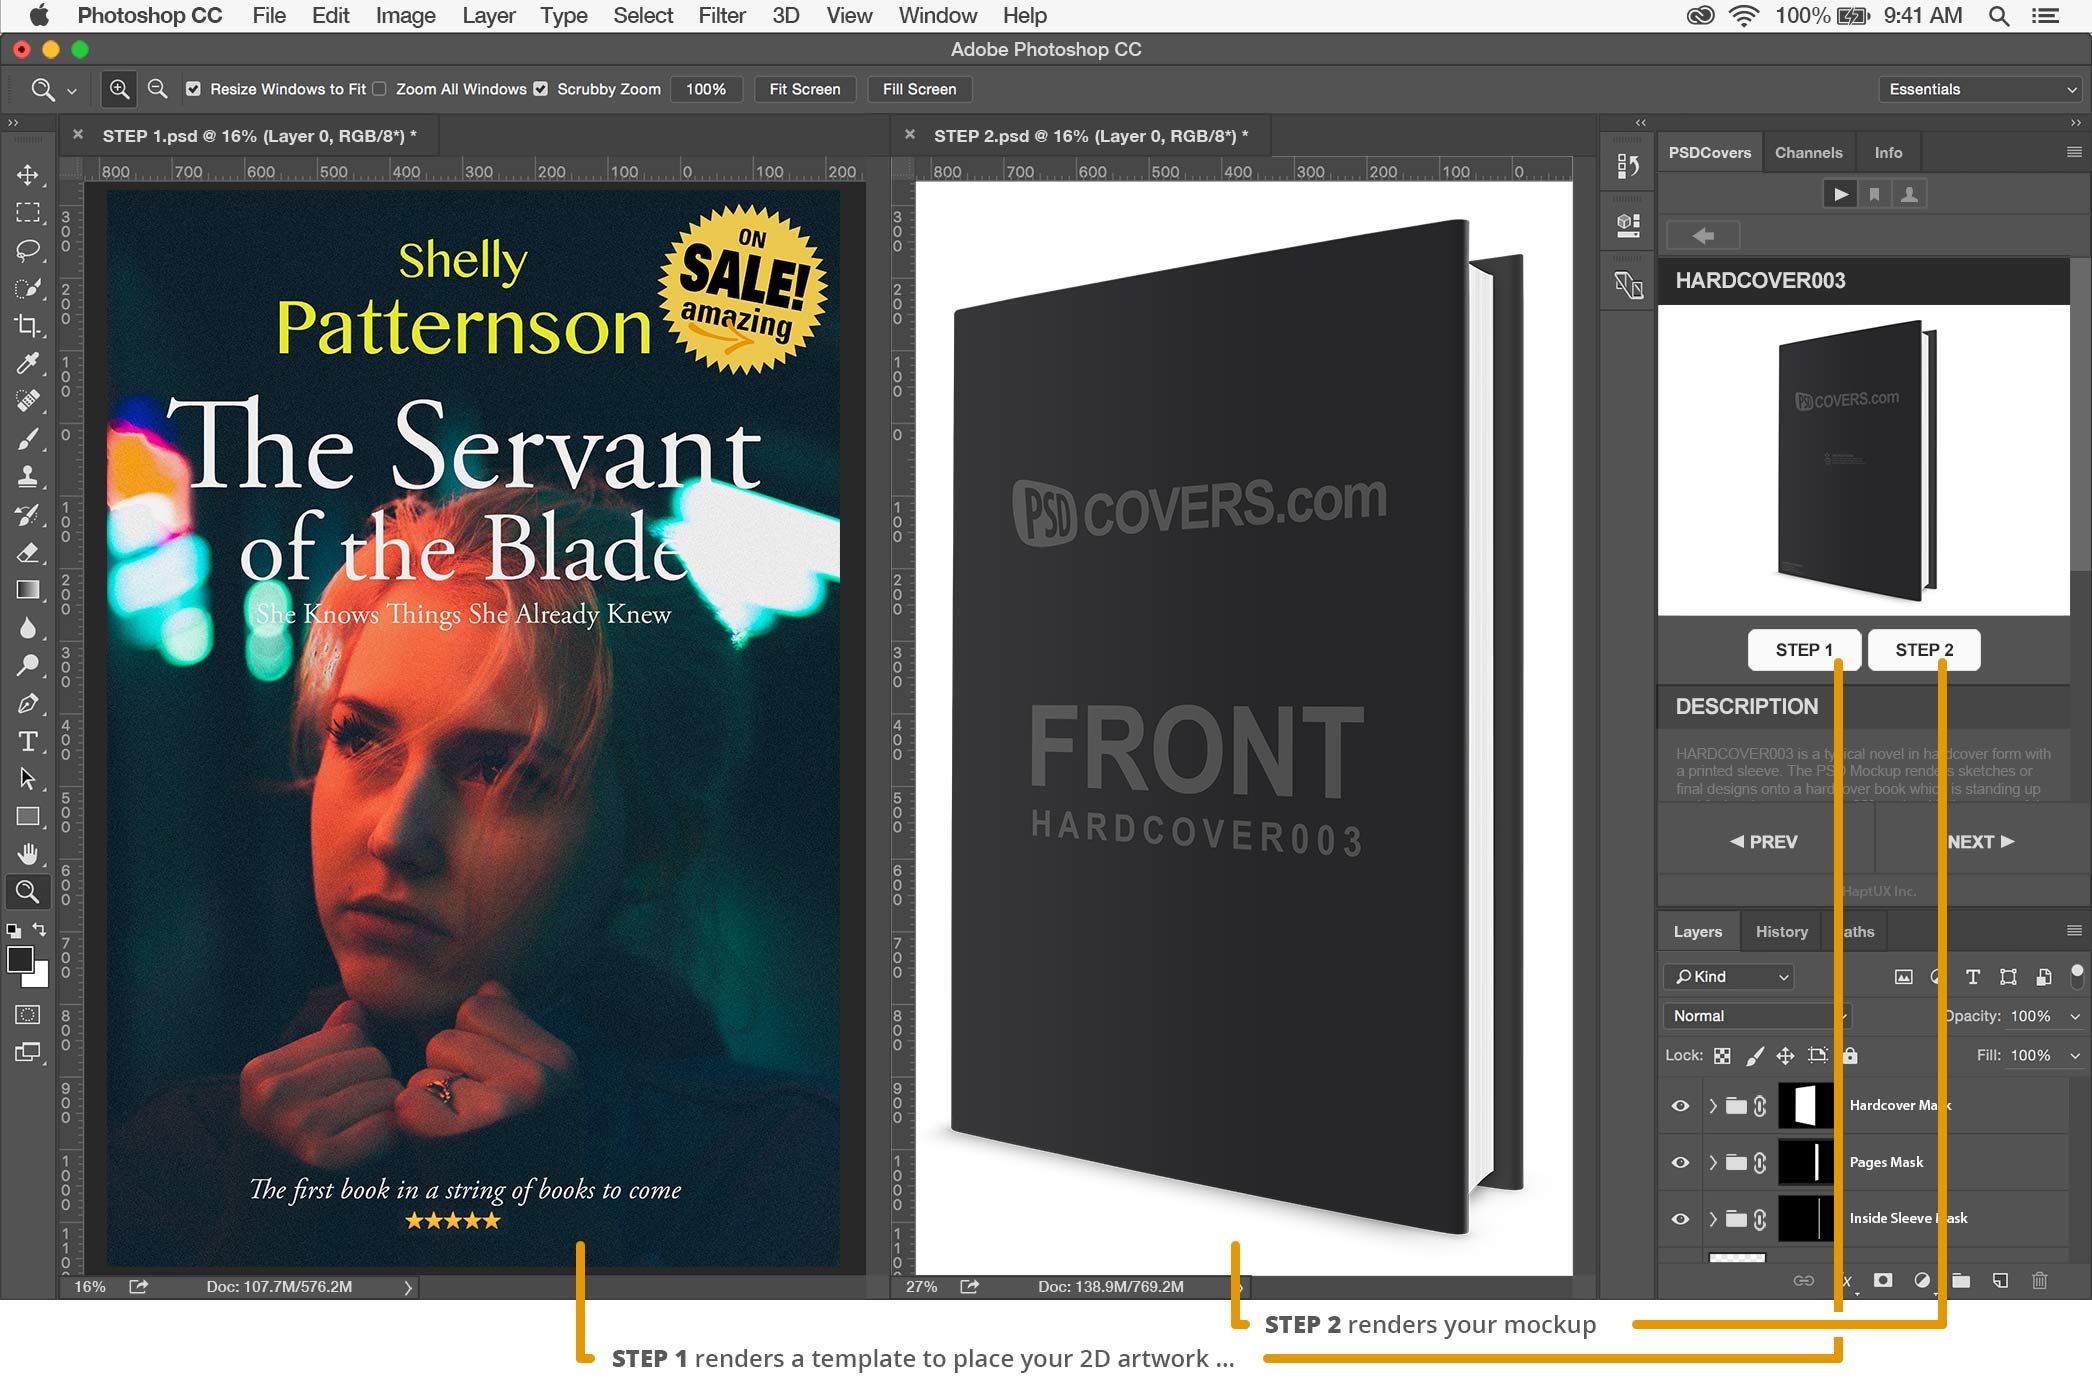 Download Recources Adobe Photoshop Mockup Generator Add On Psdcovers Download Howtomedia